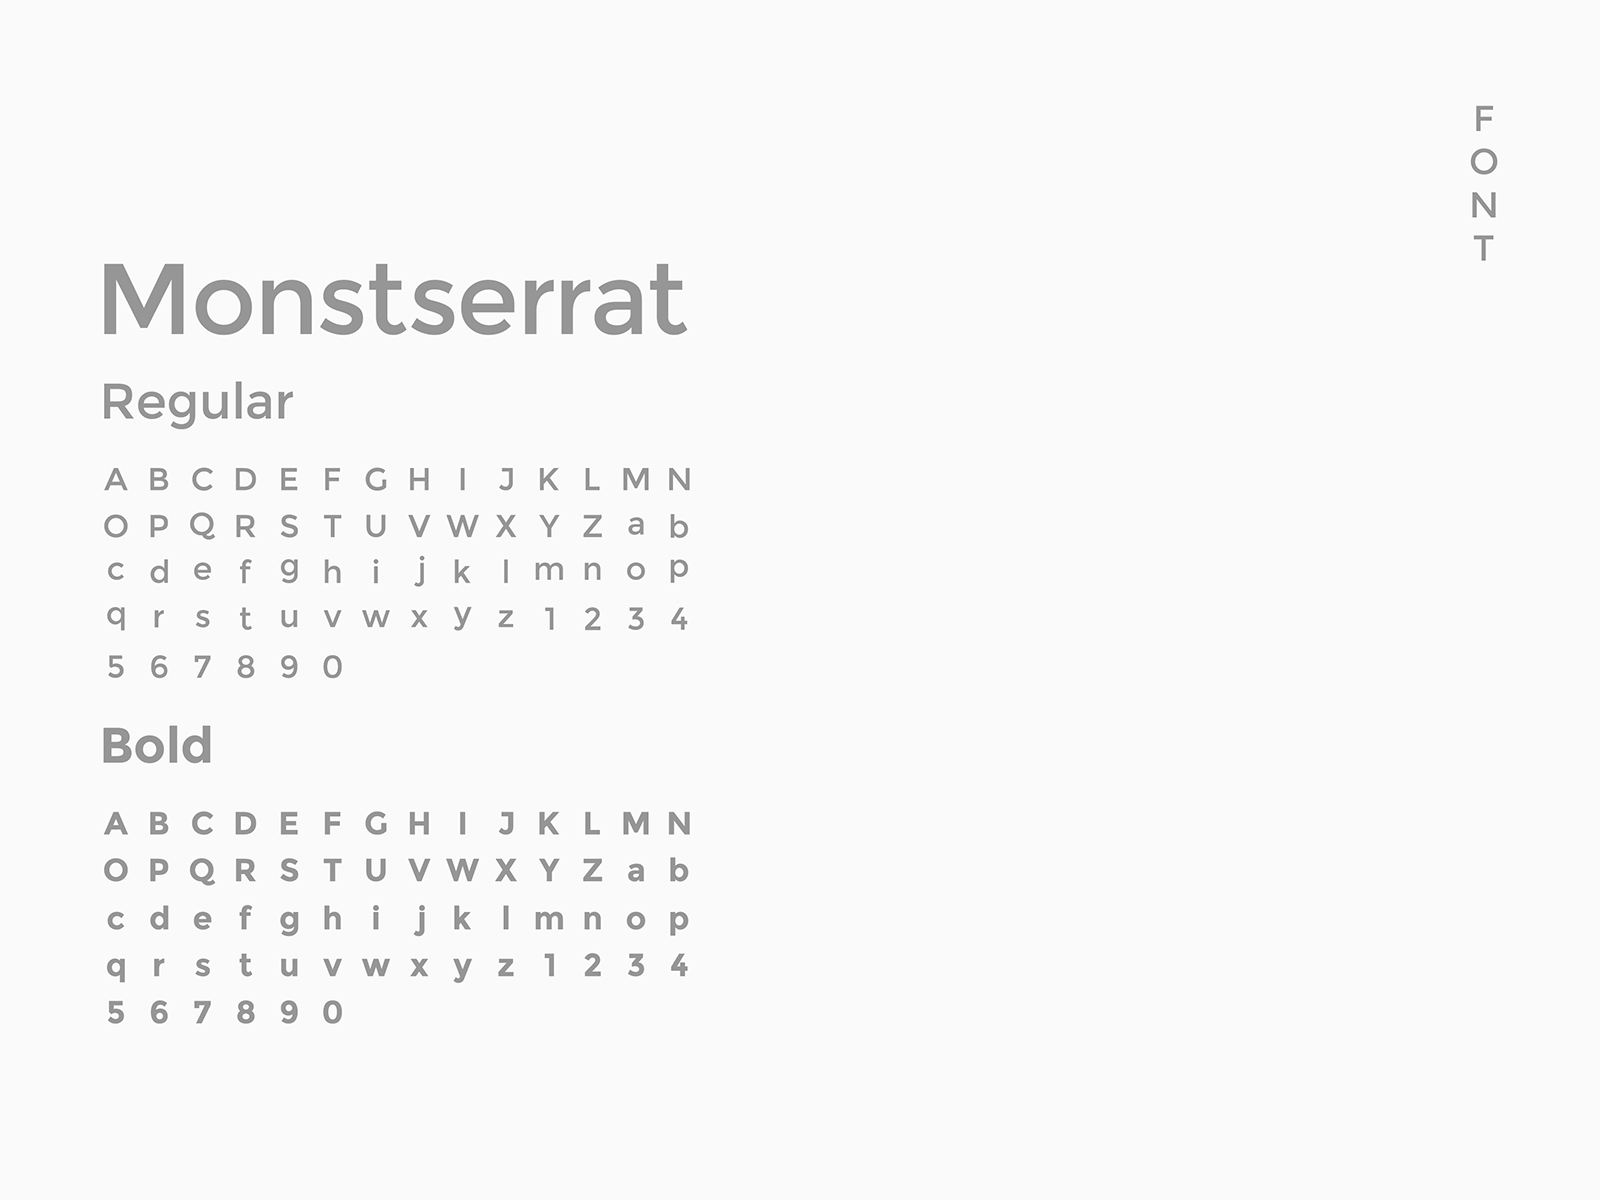 Grindz supplement brand typeface and font selection titled Monstserrat which is a web compatible font